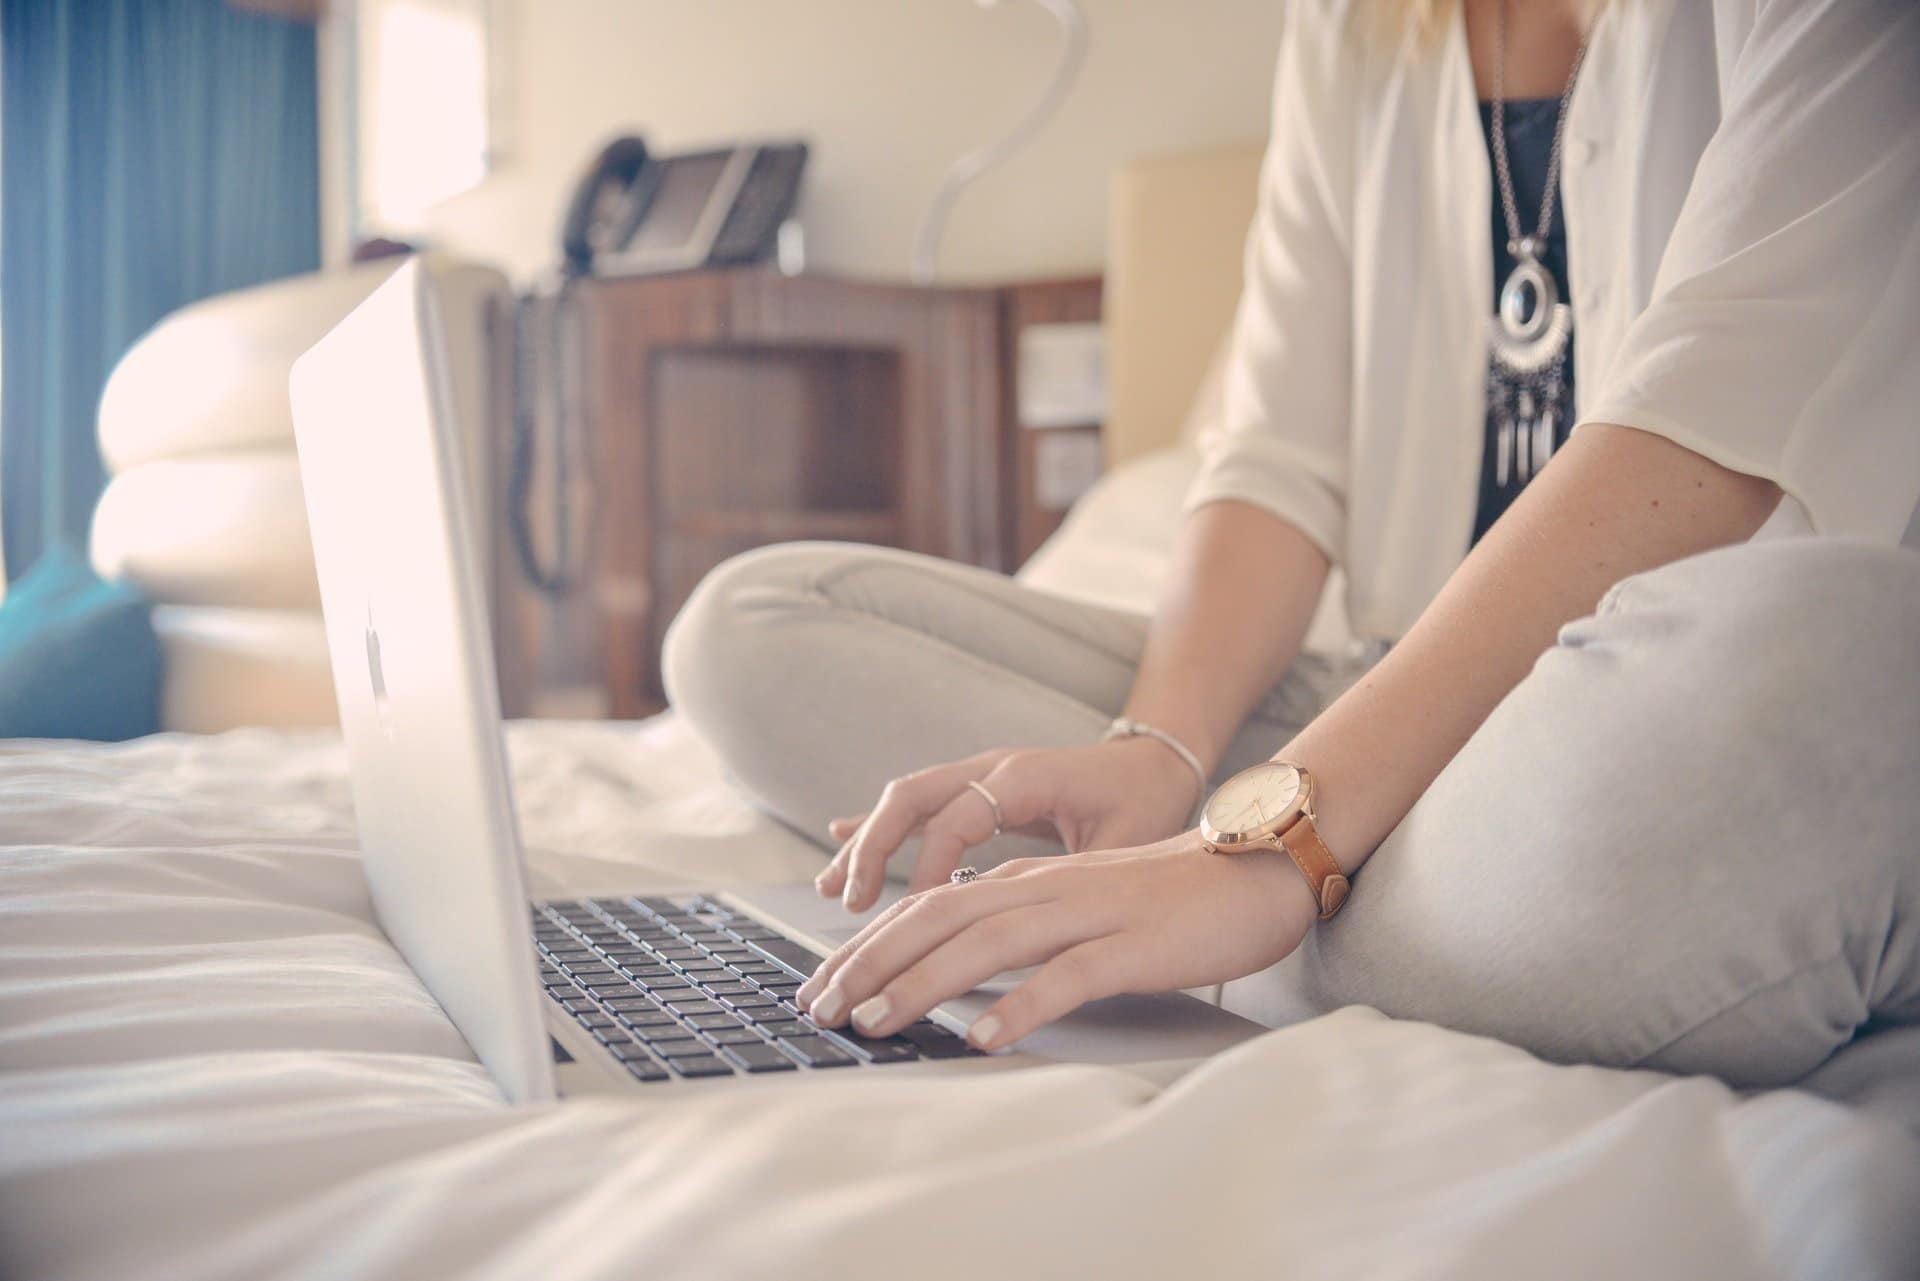 Woman sitting on bed typing on a laptop